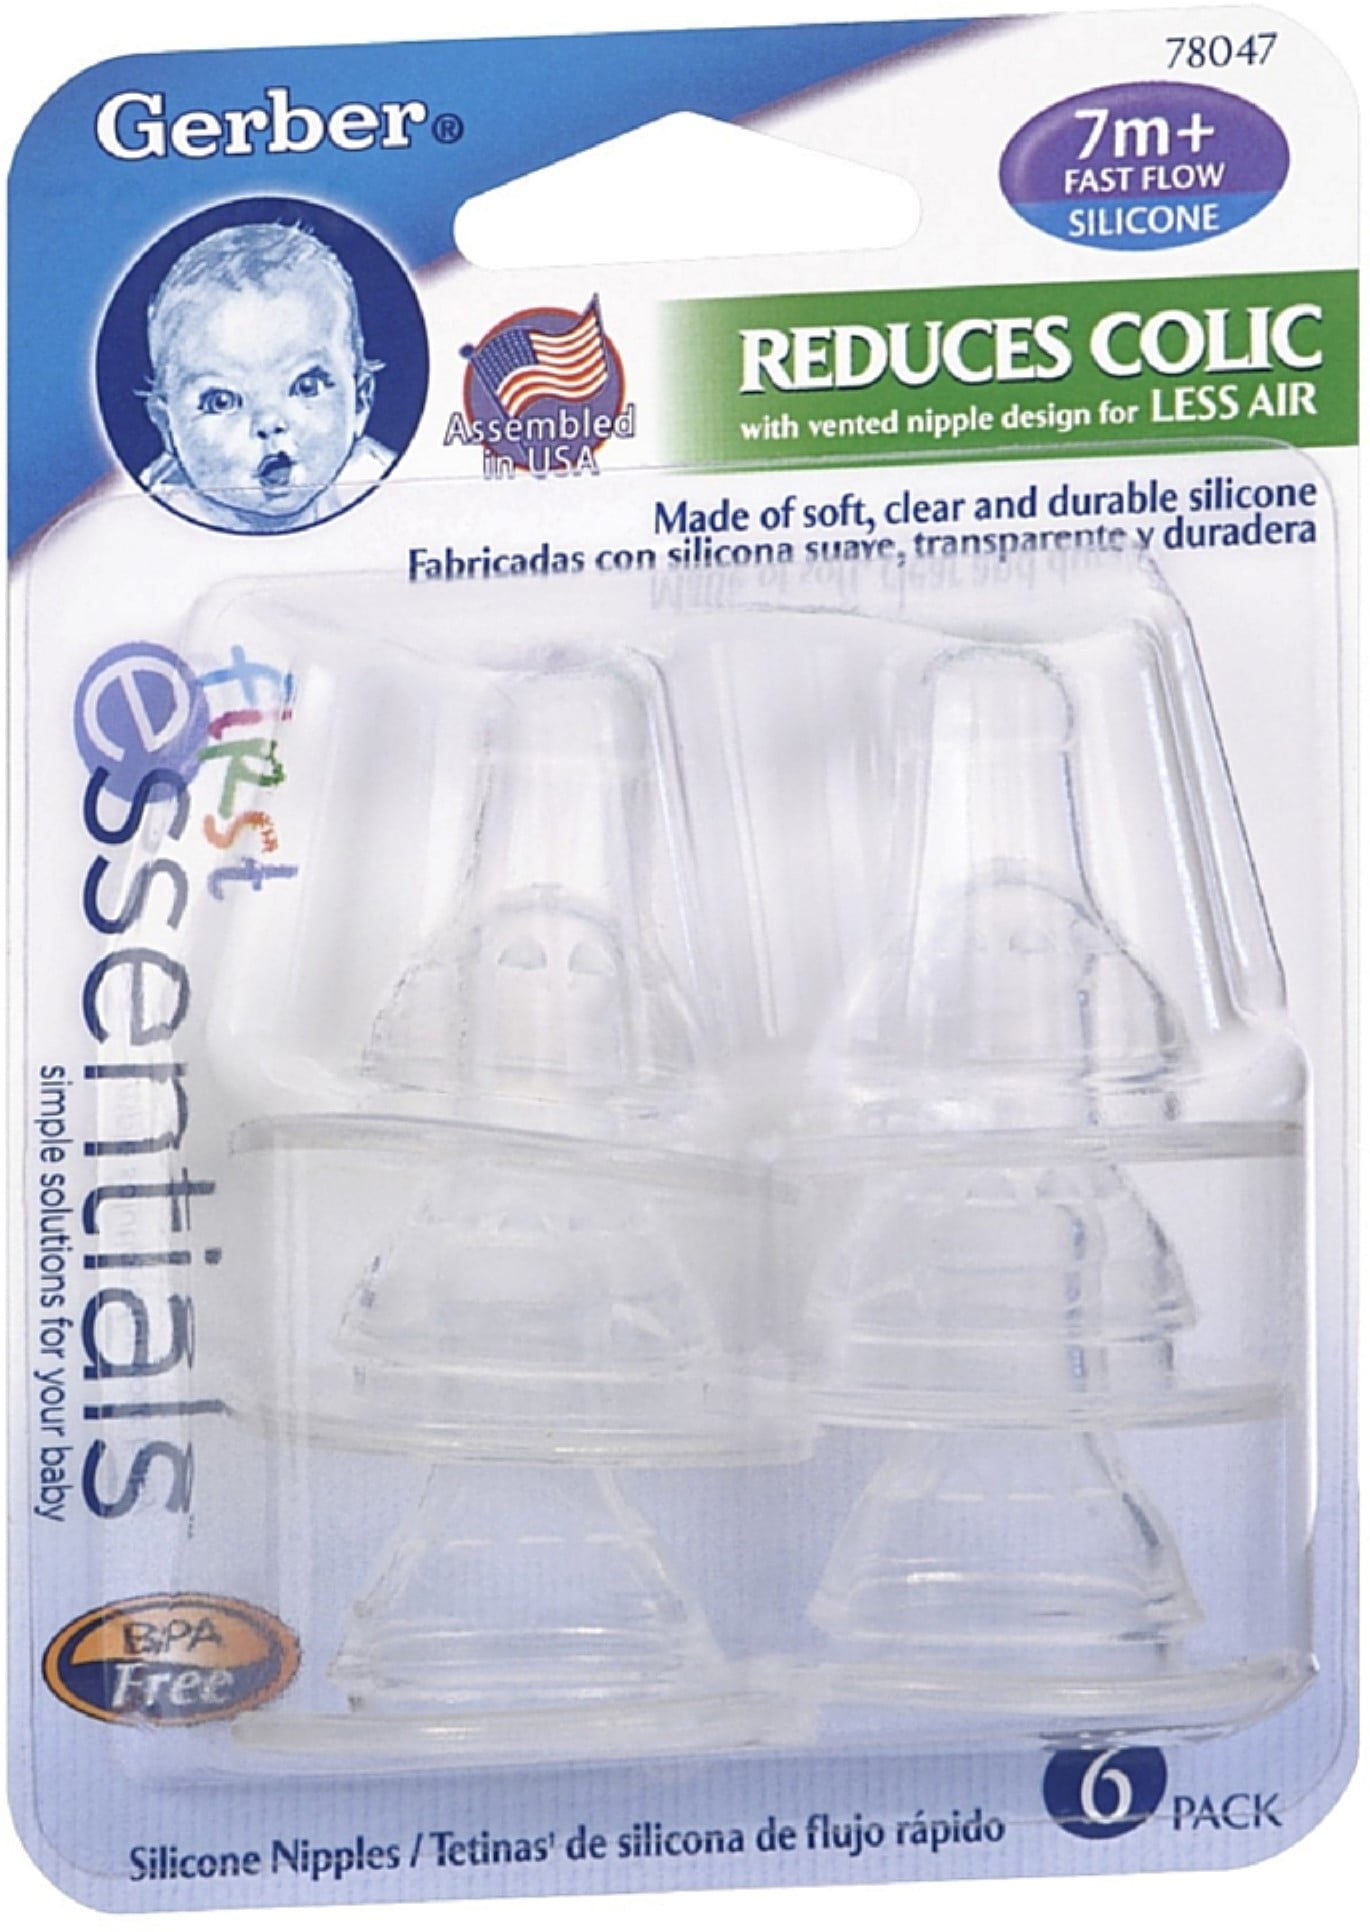 months 78046 baby bottle infant 1 brand new 6 pack Gerber silicone nipples 4 